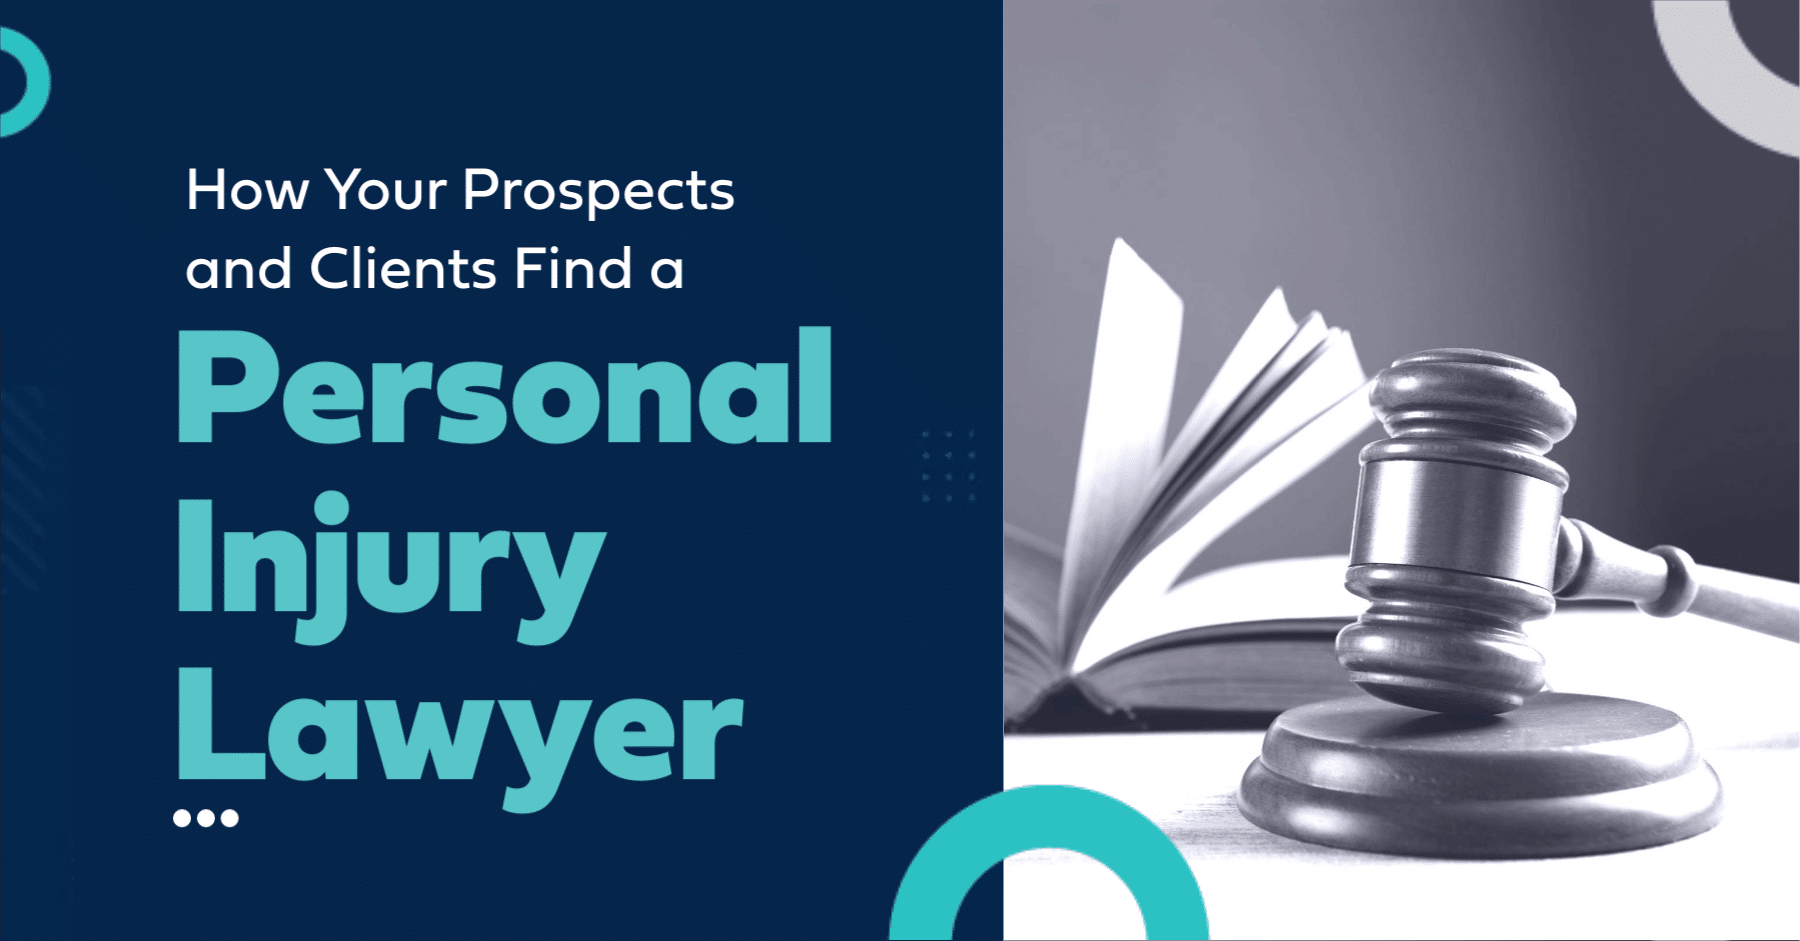 Explore top methods to find personal injury lawyers online, featuring a judges gavel and legal motifs.